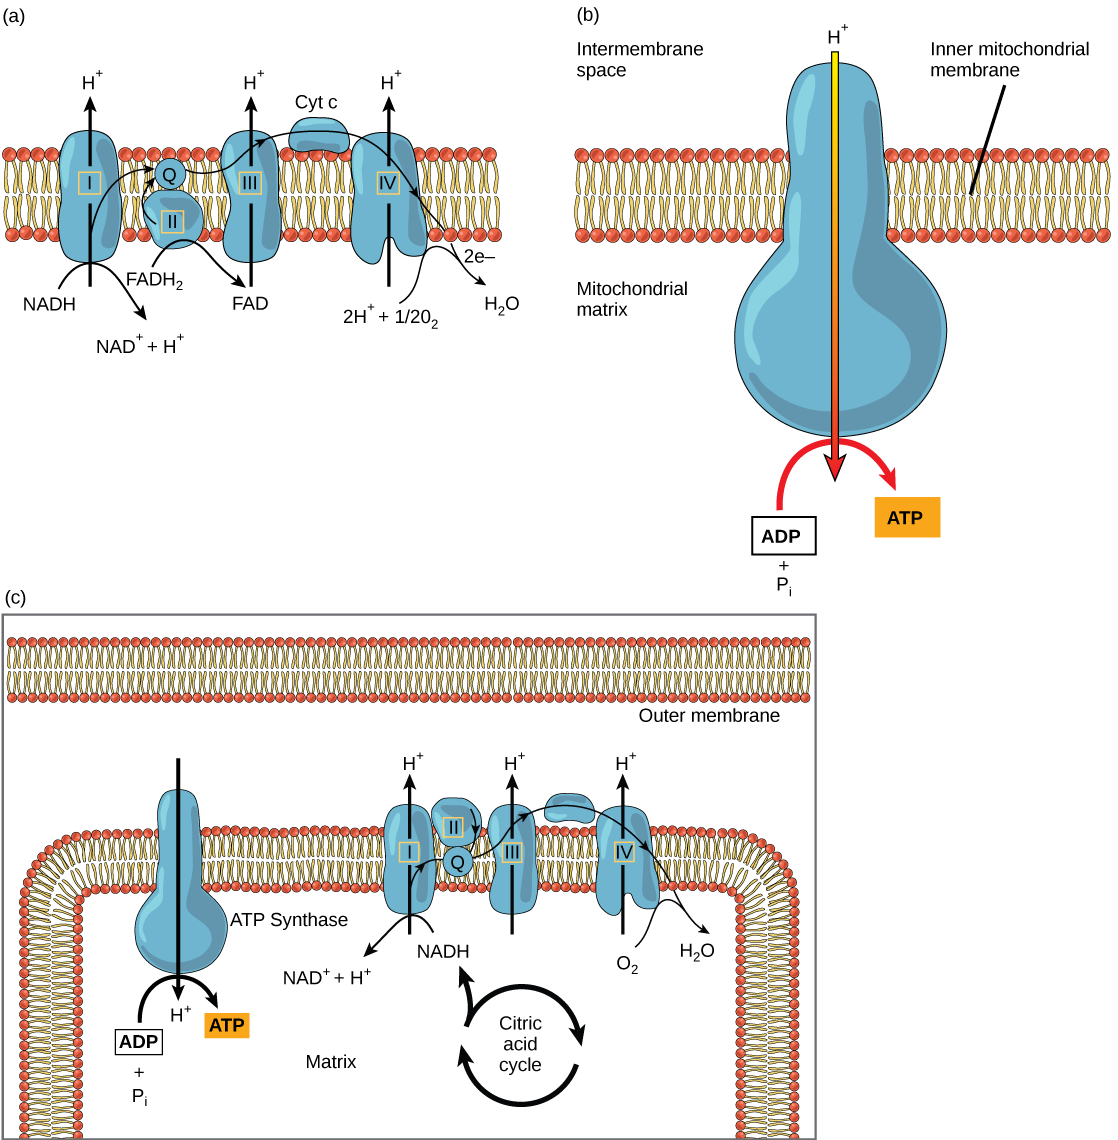 Part a: This illustration shows the electron transport chain embedded in the inner mitochondrial membrane. The electron transport chain consists of four electron complexes. Complex I oxidizes NADH to NAD+ and simultaneously pumps a proton across the membrane into the intermembrane space. The two electrons released from NADH are shuttled to coenzyme Q, then to complex III, to cytochrome c, to complex IV, then to molecular oxygen. In the process, two more protons are pumped across the membrane into the intermembrane space, and molecular oxygen is reduced to form water. Complex II removes two electrons from FADH2, thereby forming FAD. The electrons are shuttled to coenzyme Q, then to complex III, cytochrome c, complex I, and molecular oxygen as in the case of NADH oxidation. Part b: This illustration shows an ATP synthase enzyme embedded in the inner mitochondrial membrane. ATP synthase allows protons to move from an area of high concentration in the intermembrane space to an area of low concentration in the mitochondrial matrix. The energy derived from this exergonic process is used to synthesize ATP from ADP and inorganic phosphate. Part c: This illustration shows the electron transport chain and ATP synthase enzyme embedded in the inner mitochondrial membrane, and the citric acid cycle in the mitochondrial matrix. The citric acid cycle feeds NADH and FADH2 into the electron transport chain. The electron transport chain oxidizes these substrates and, in the process, pumps protons into the intermembrane space. ATP synthase allows protons to leak back into the matrix and synthesizes ATP. 